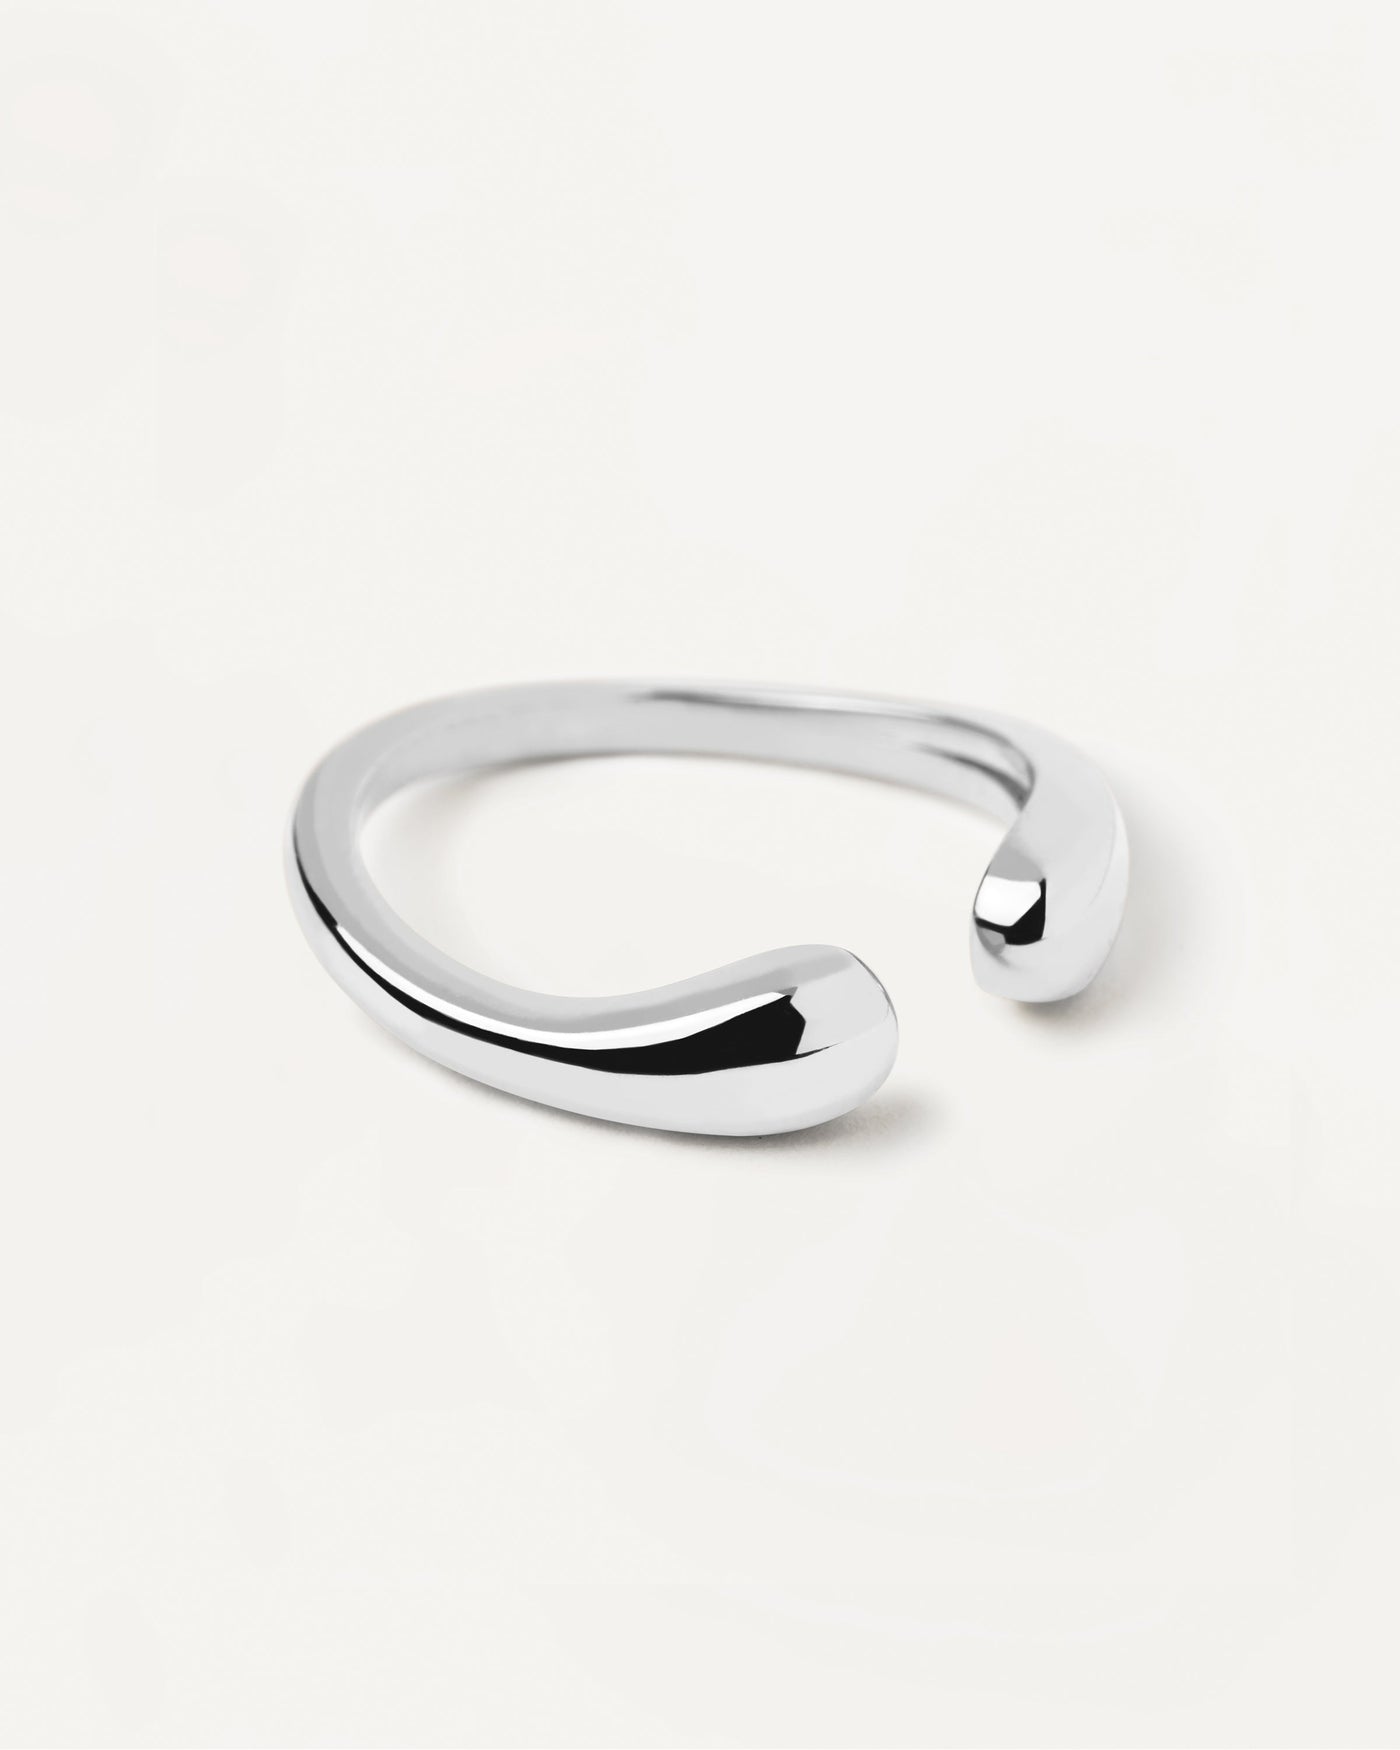 2023 Selection | Crush Silver Ring. Bold and curvy unclosed-ring in sterling silver. Get the latest arrival from PDPAOLA. Place your order safely and get this Best Seller. Free Shipping.